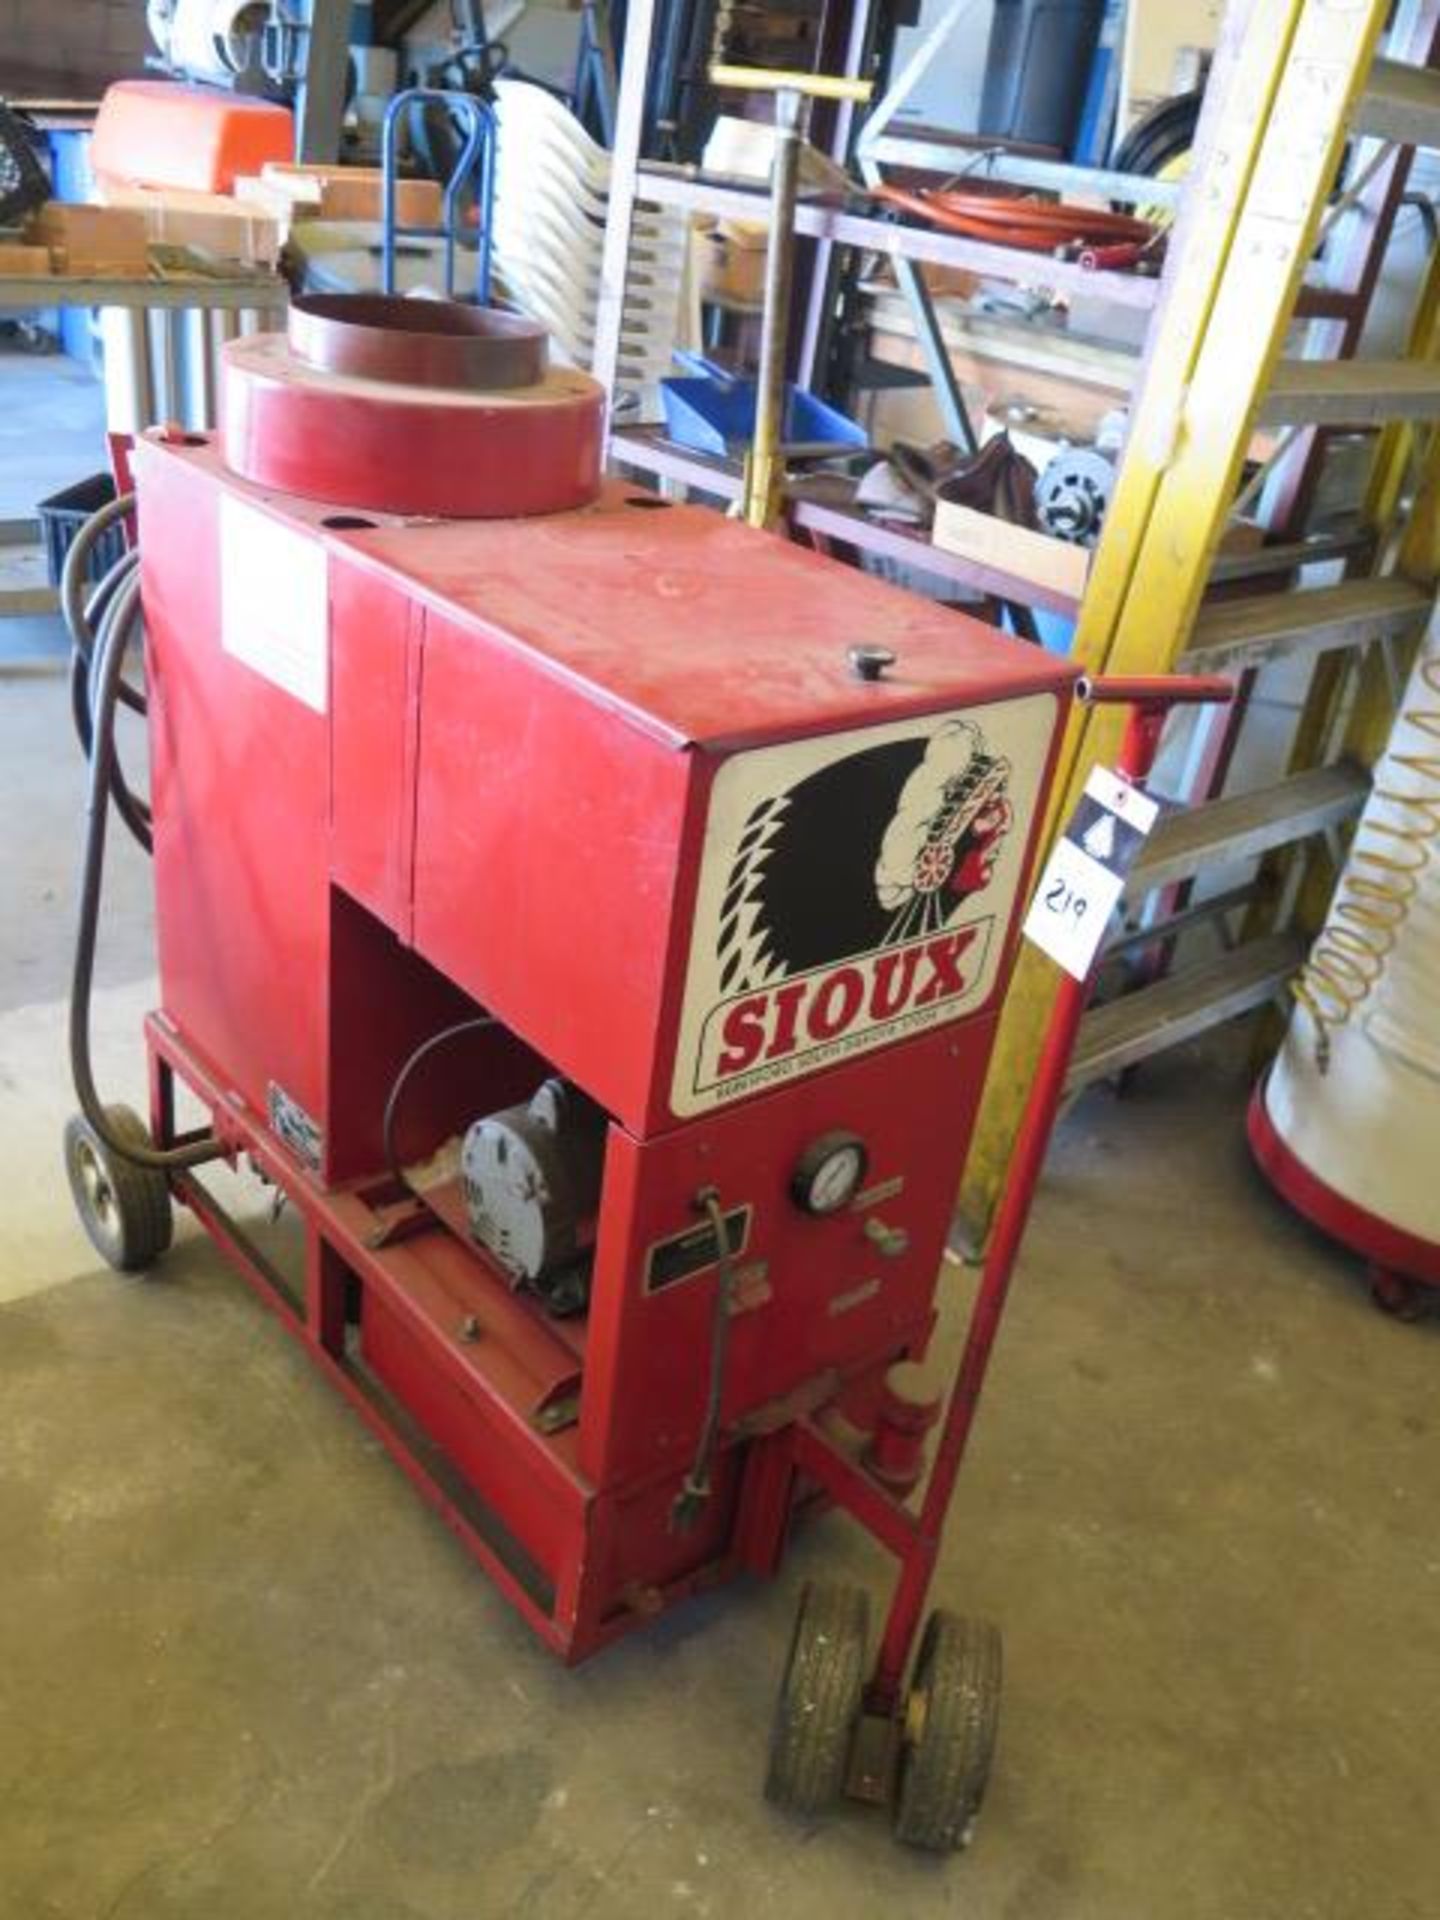 Sioux mdl. 106-BB Oil Fired Pressure Washer s/n 089054 (SOLD AS-IS - NO WARRANTY) - Image 2 of 8